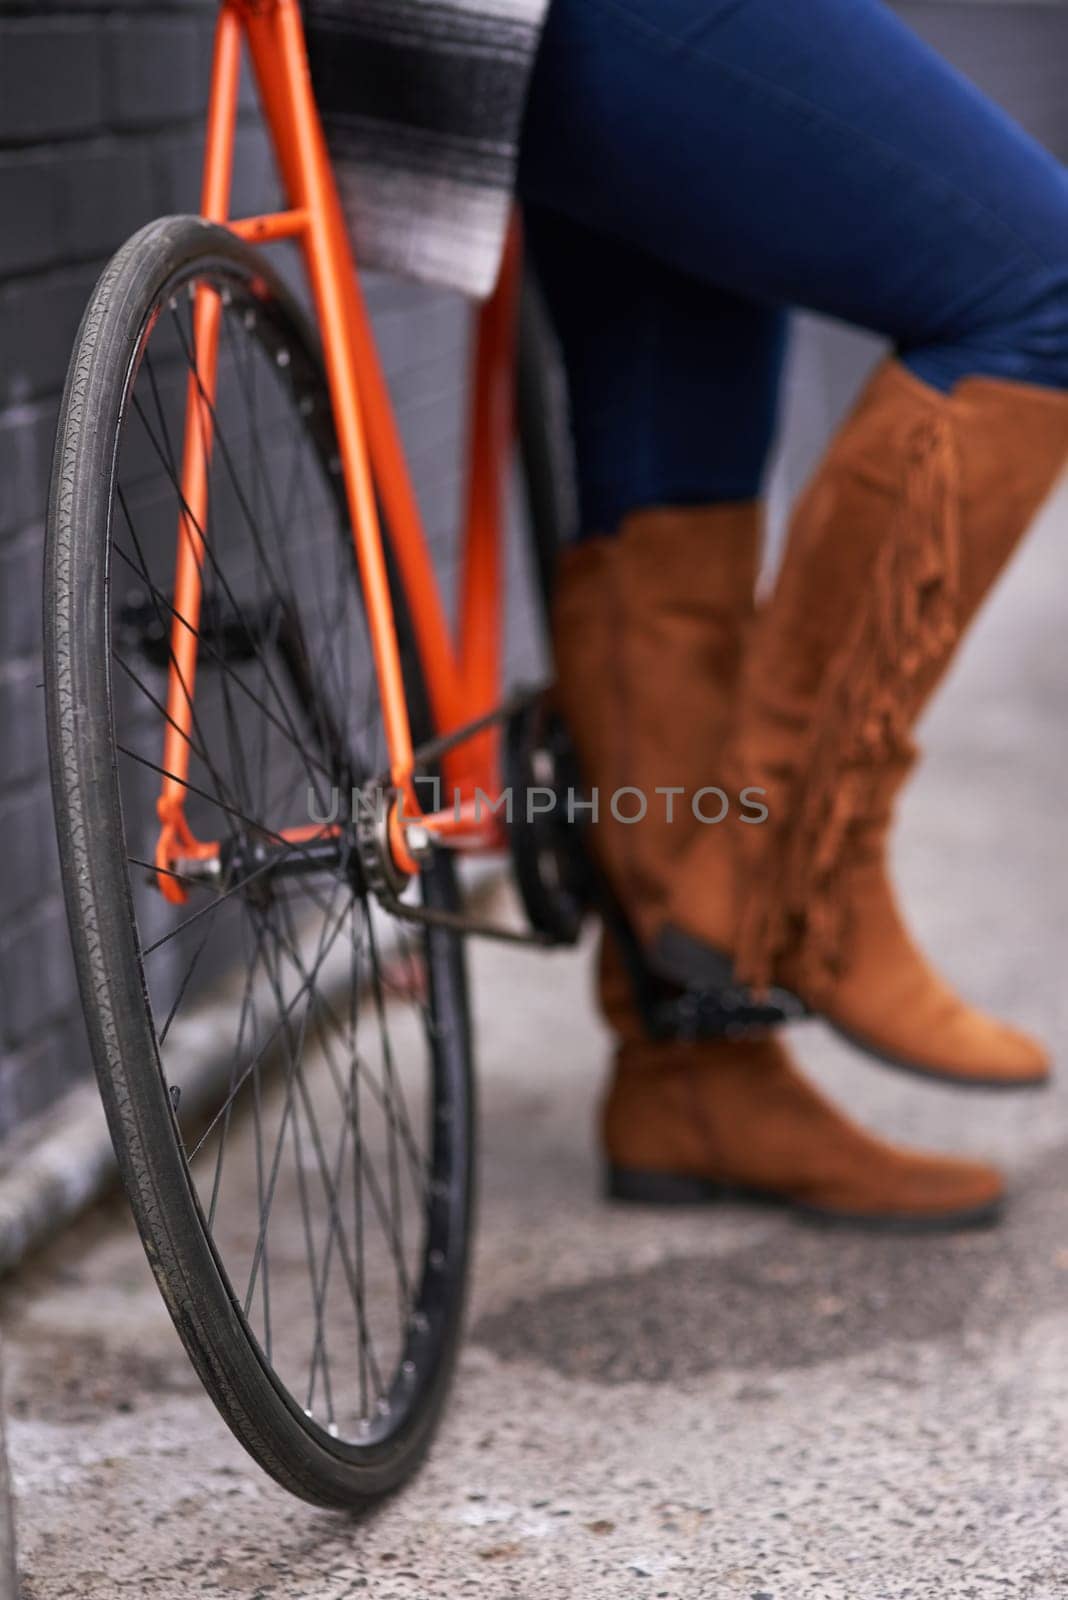 Legs, person and bicycle with standing on a road with morning transport and commute with boots. Retro, transportation and cycling on an urban sidewalk with shoes and travel in the city with bike.